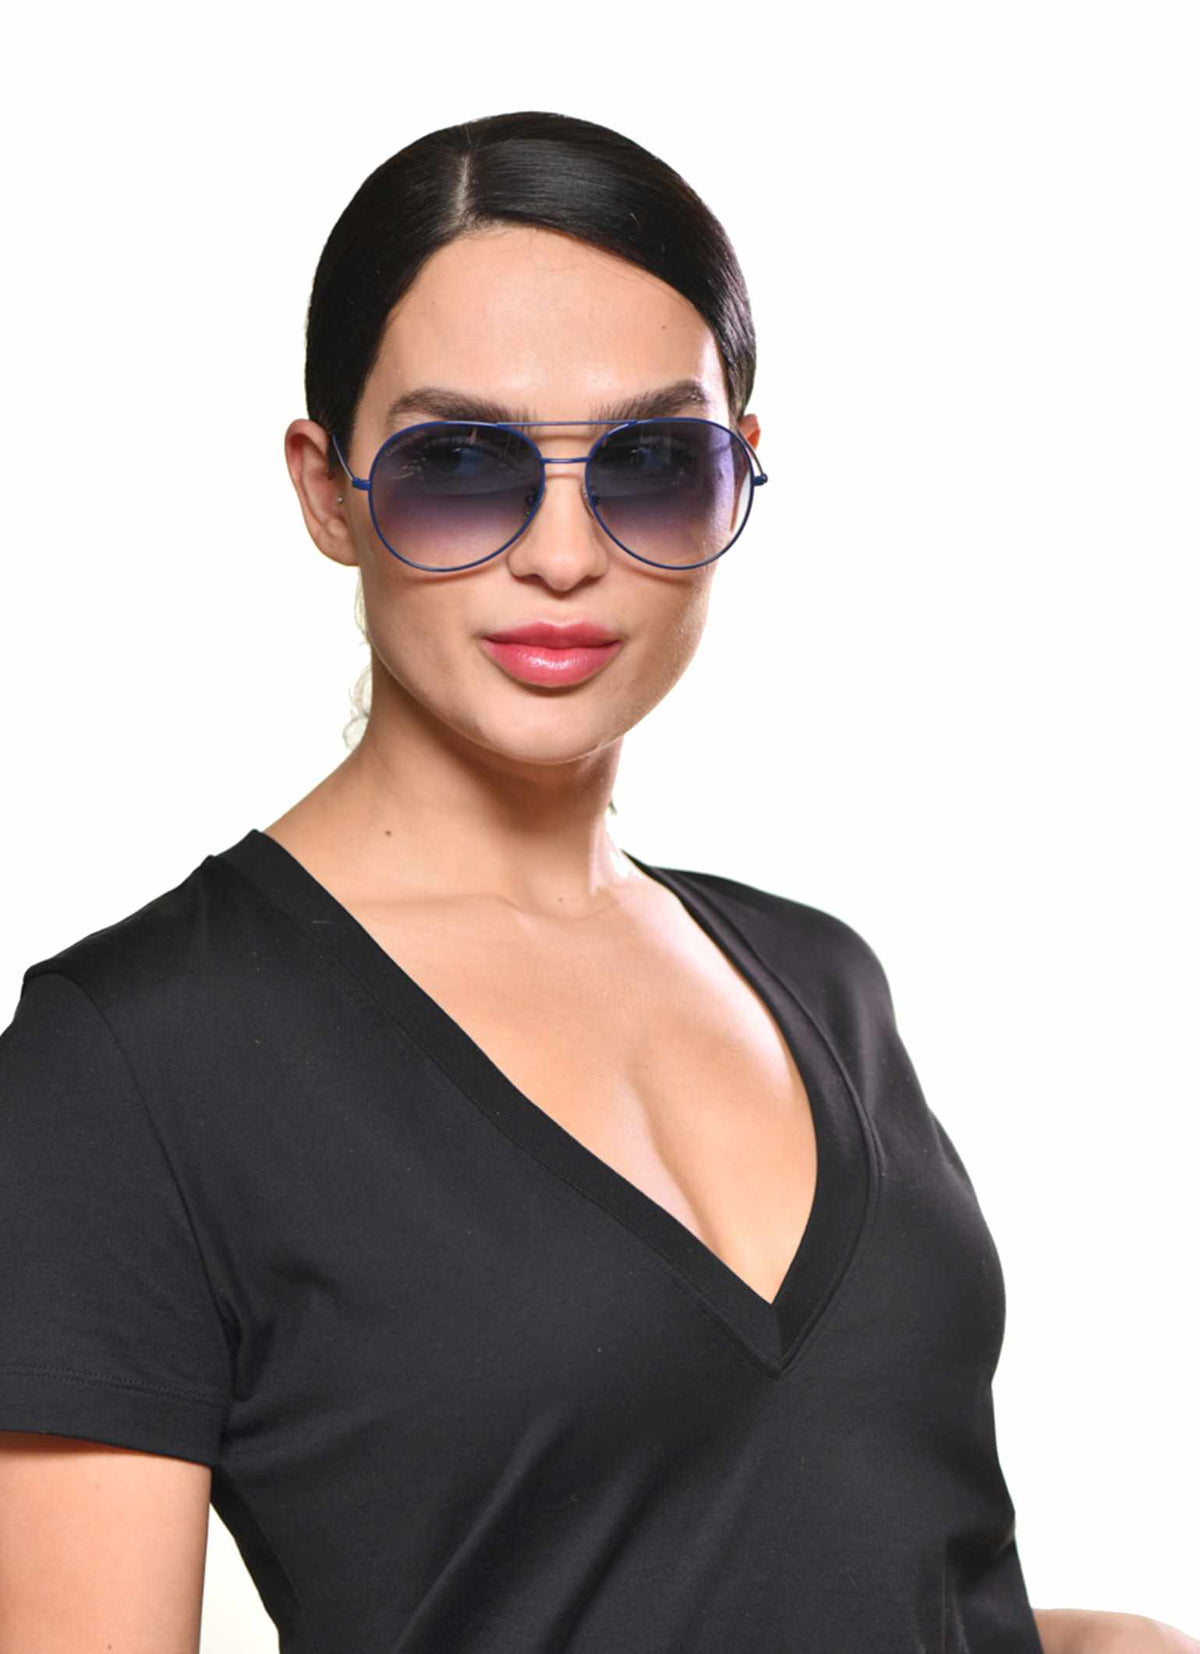 Beautiful Made in Italy sunglasses for women and for men